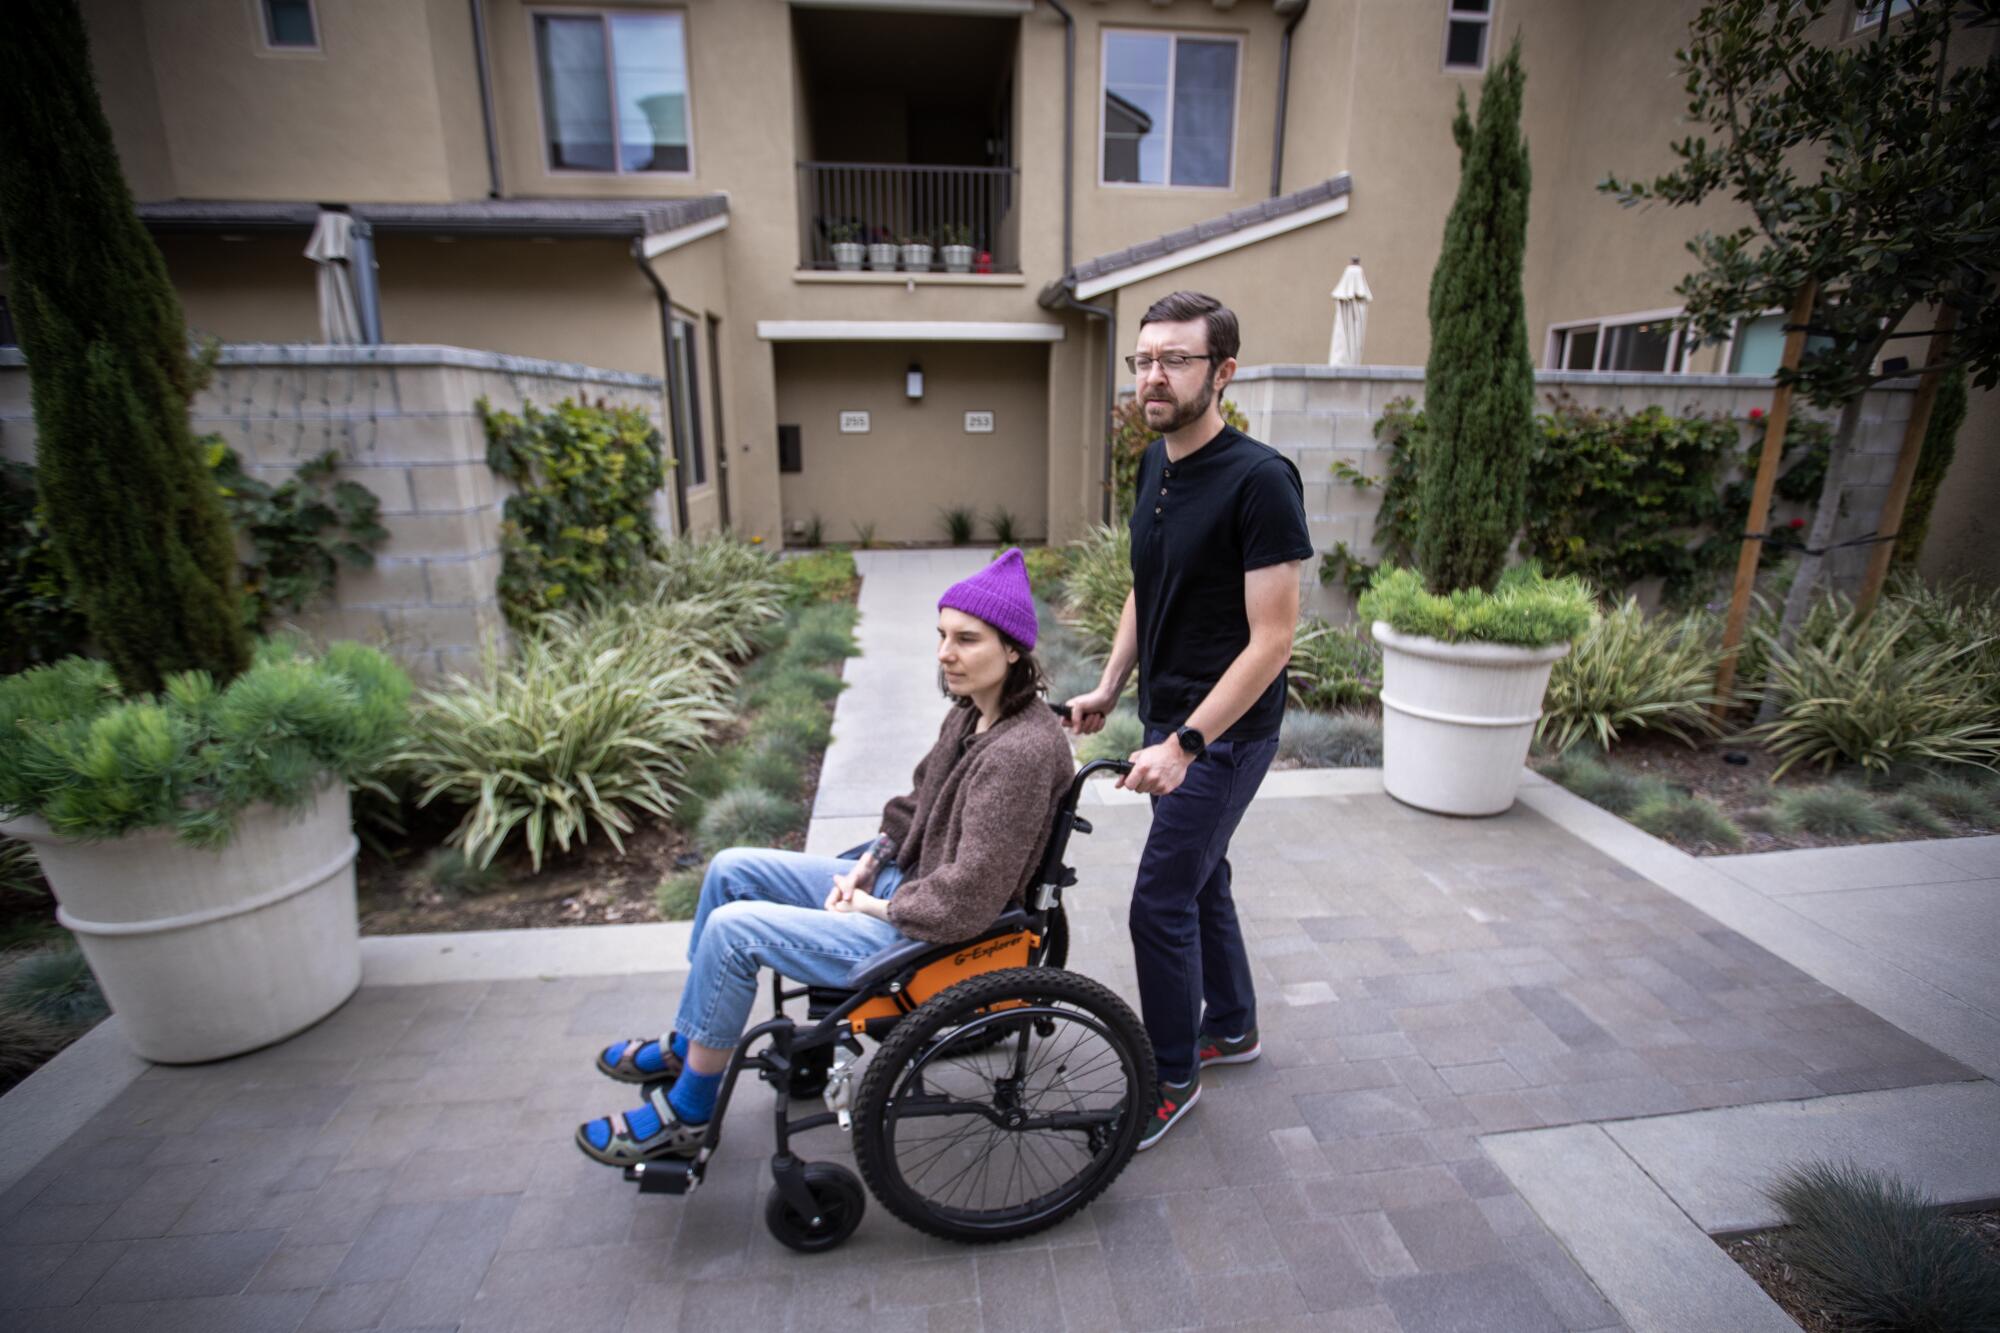 Connor Mayer pushes his partner, Courtney Garvin, in a wheelchair as they go outside for fresh air.